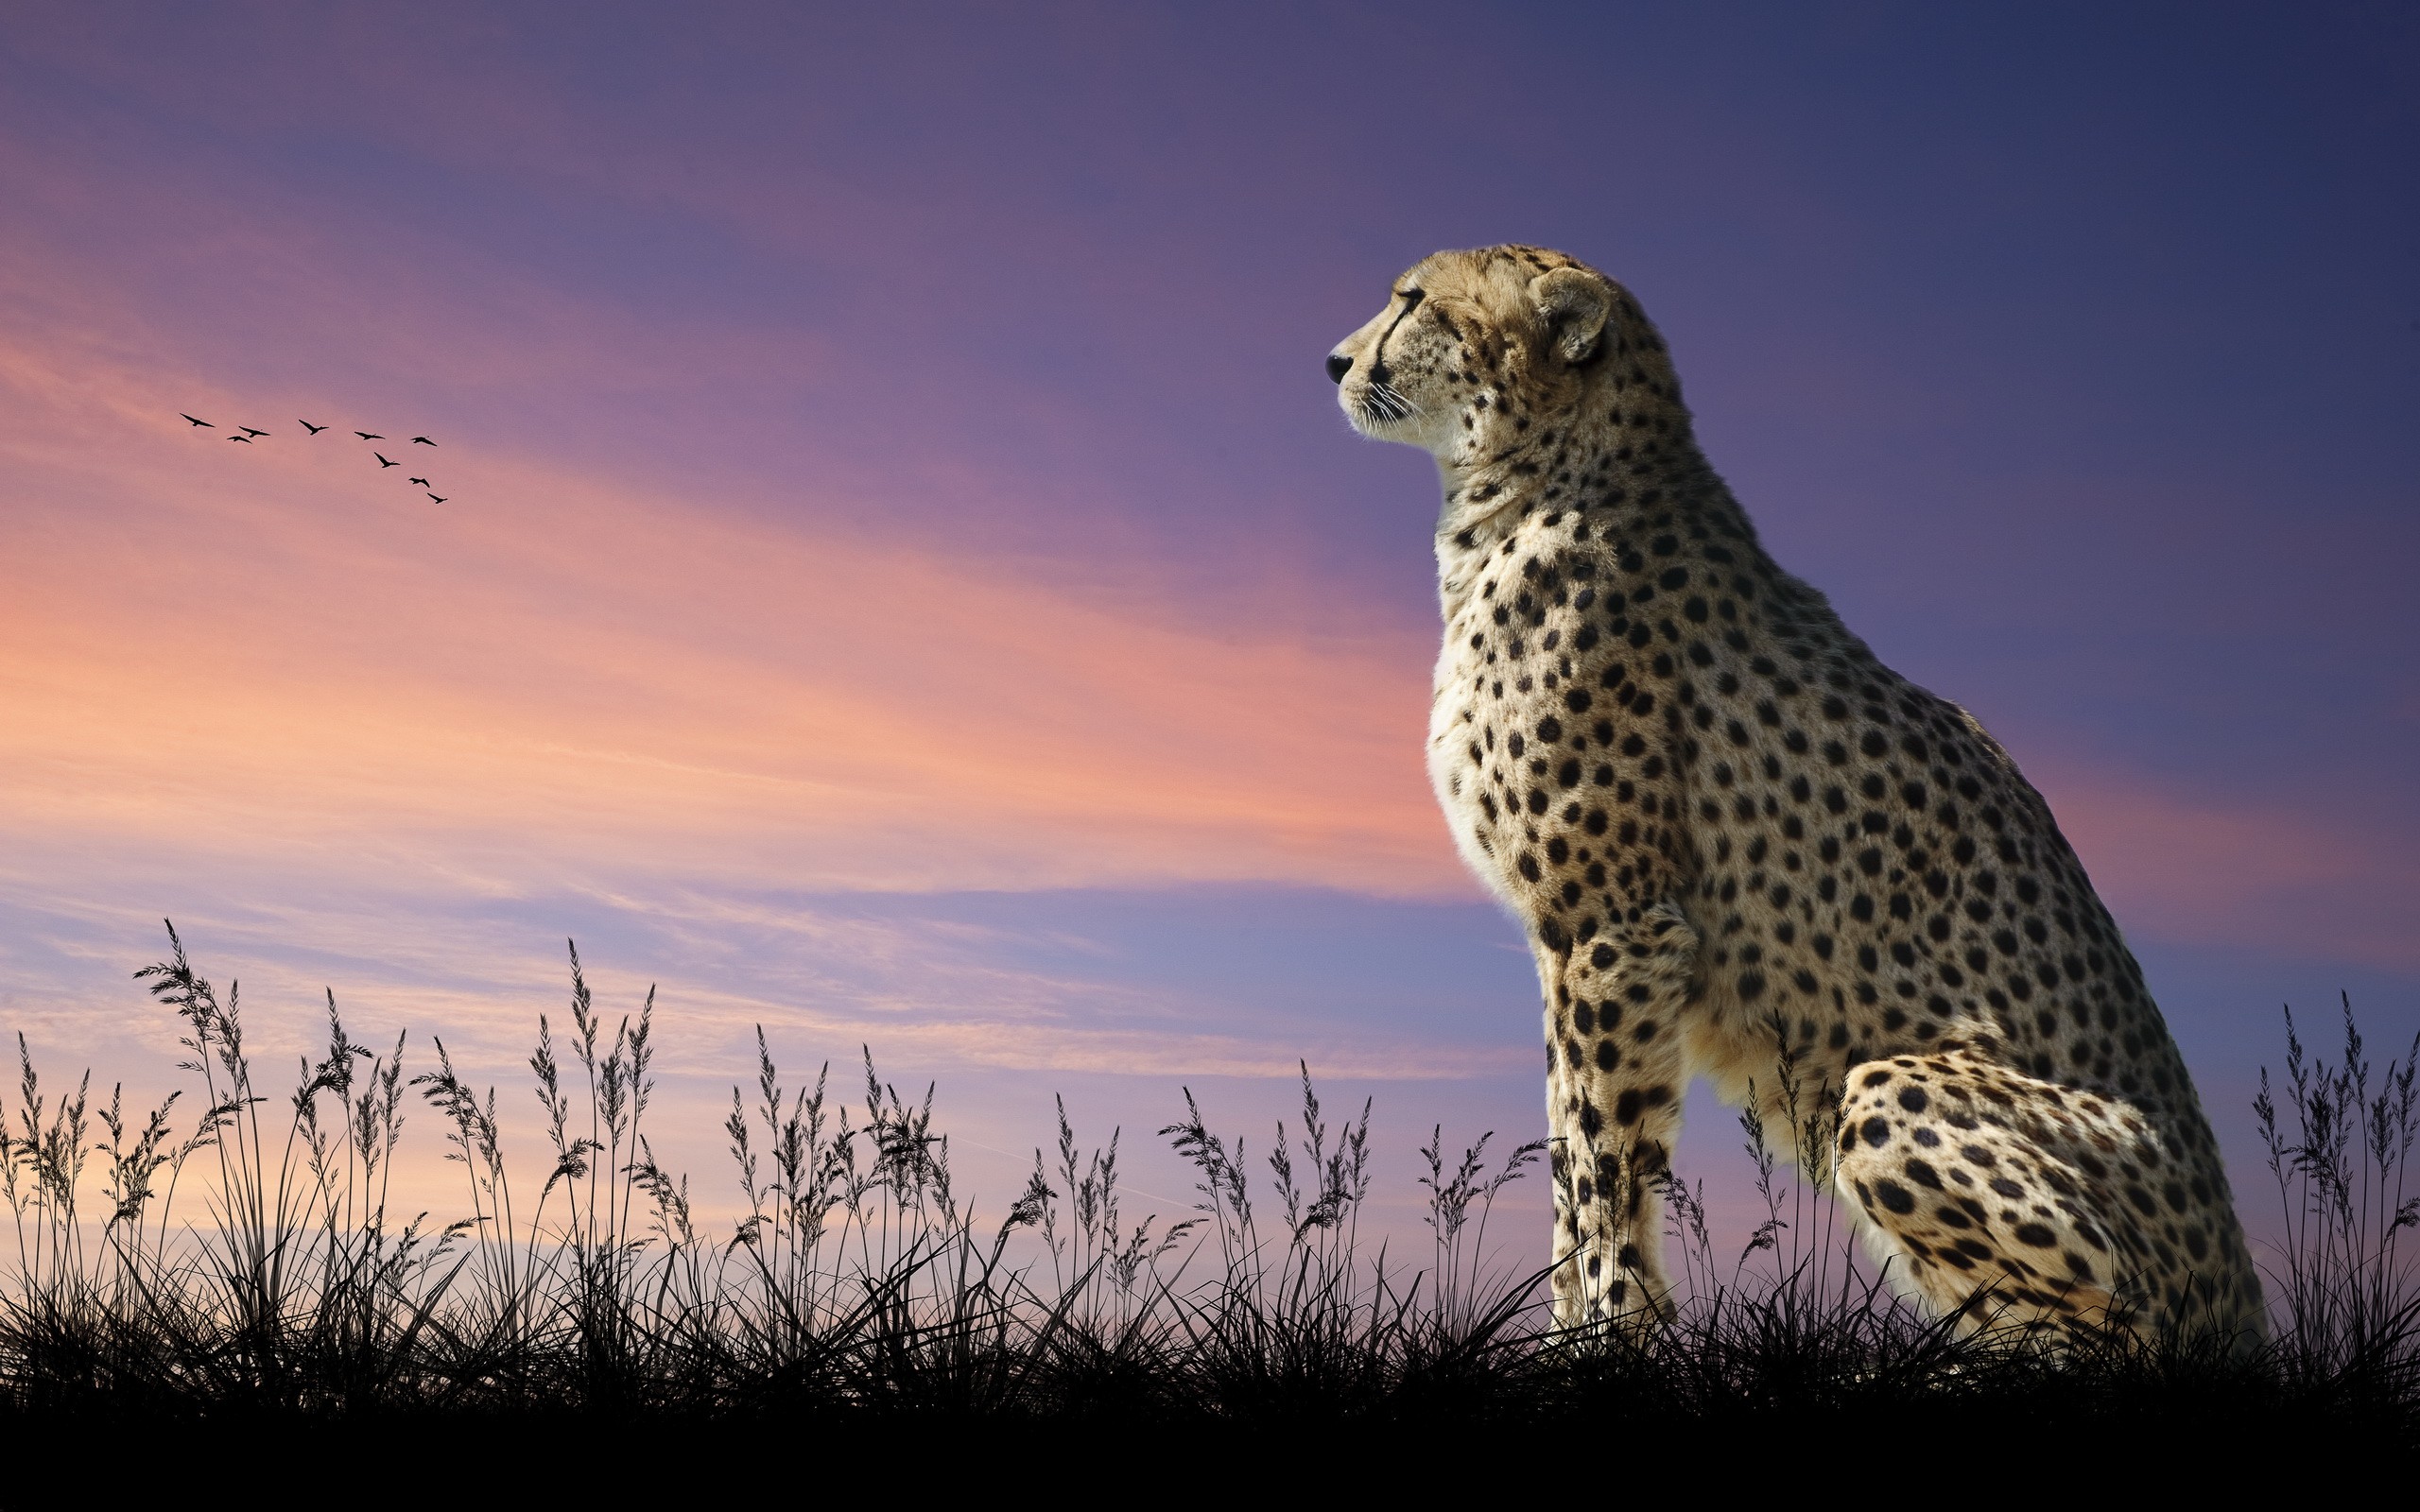 Cheetah Wallpapers HD Pictures Live HD Wallpaper HQ